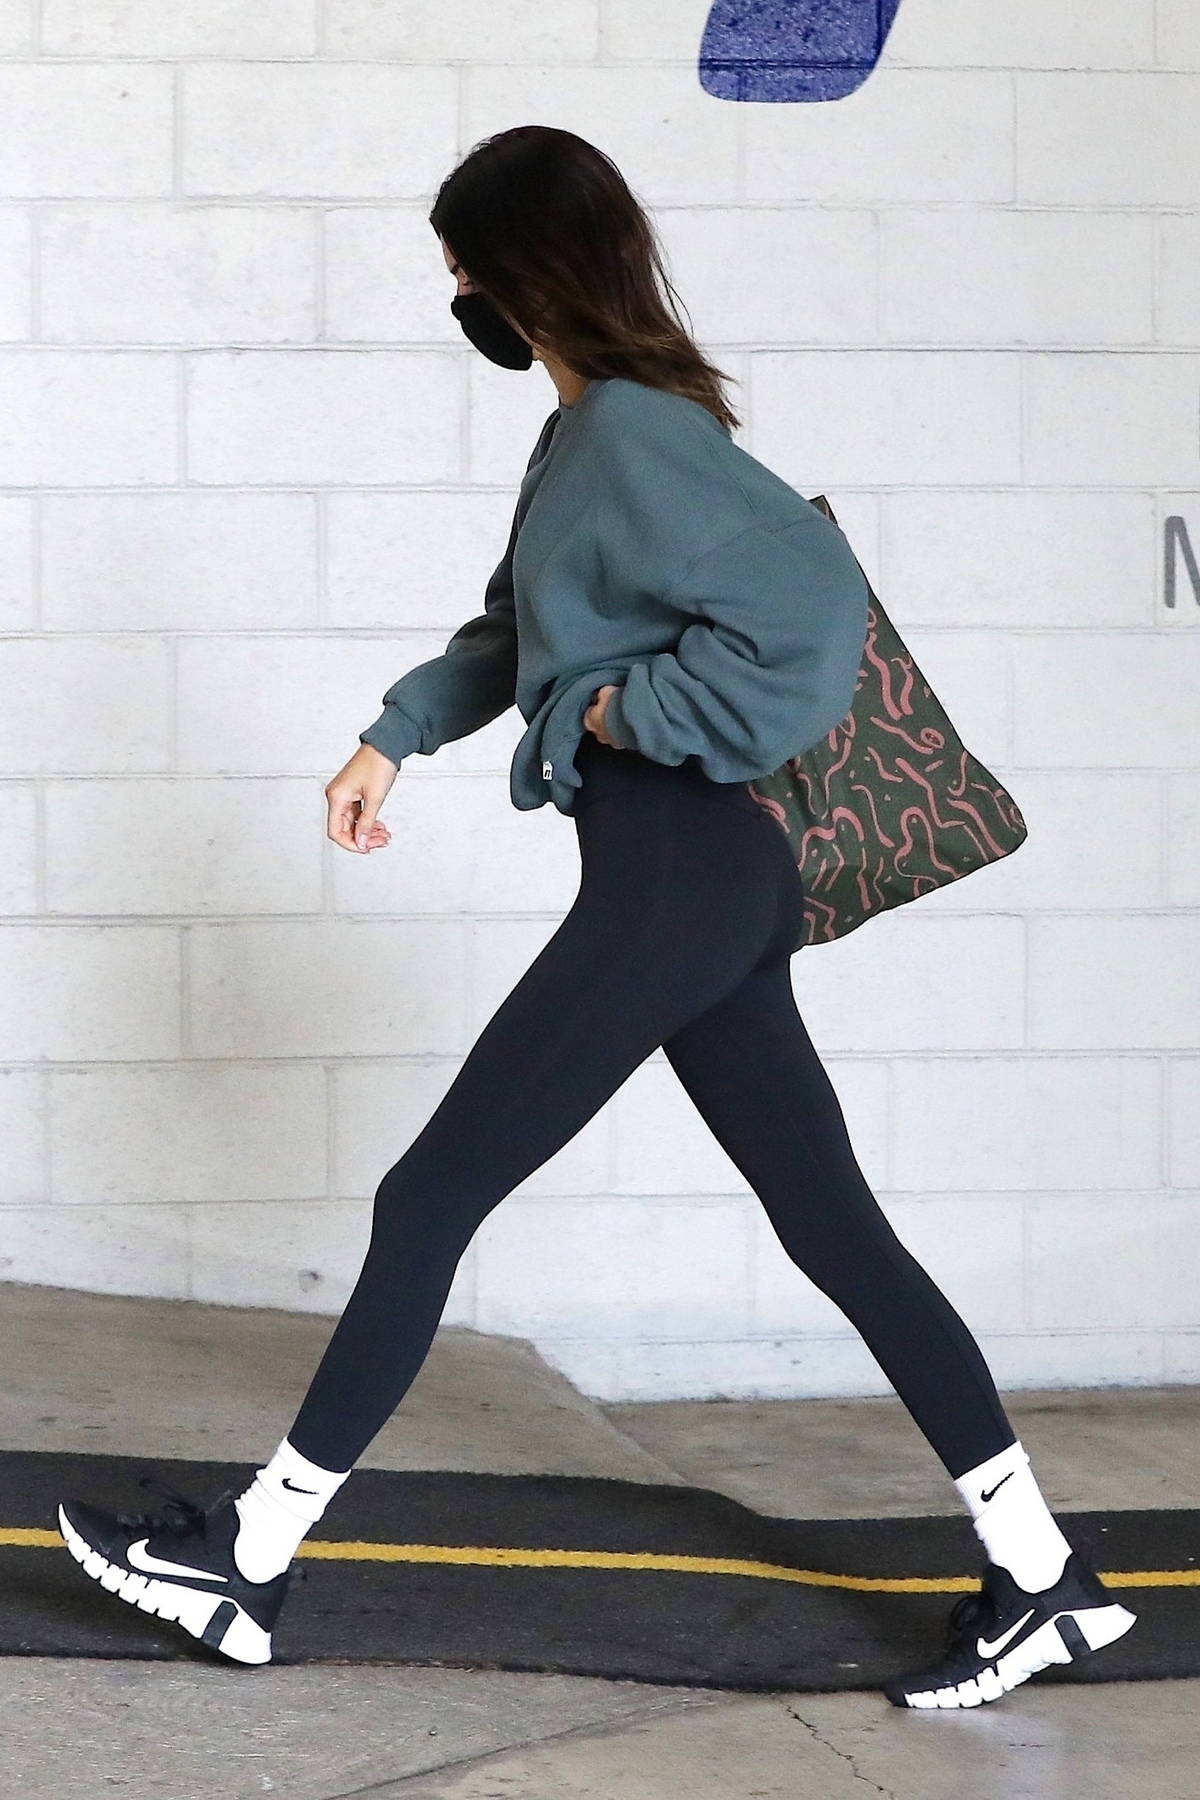 Kendall Jenner sports an oversized sweatshirt with leggings as she